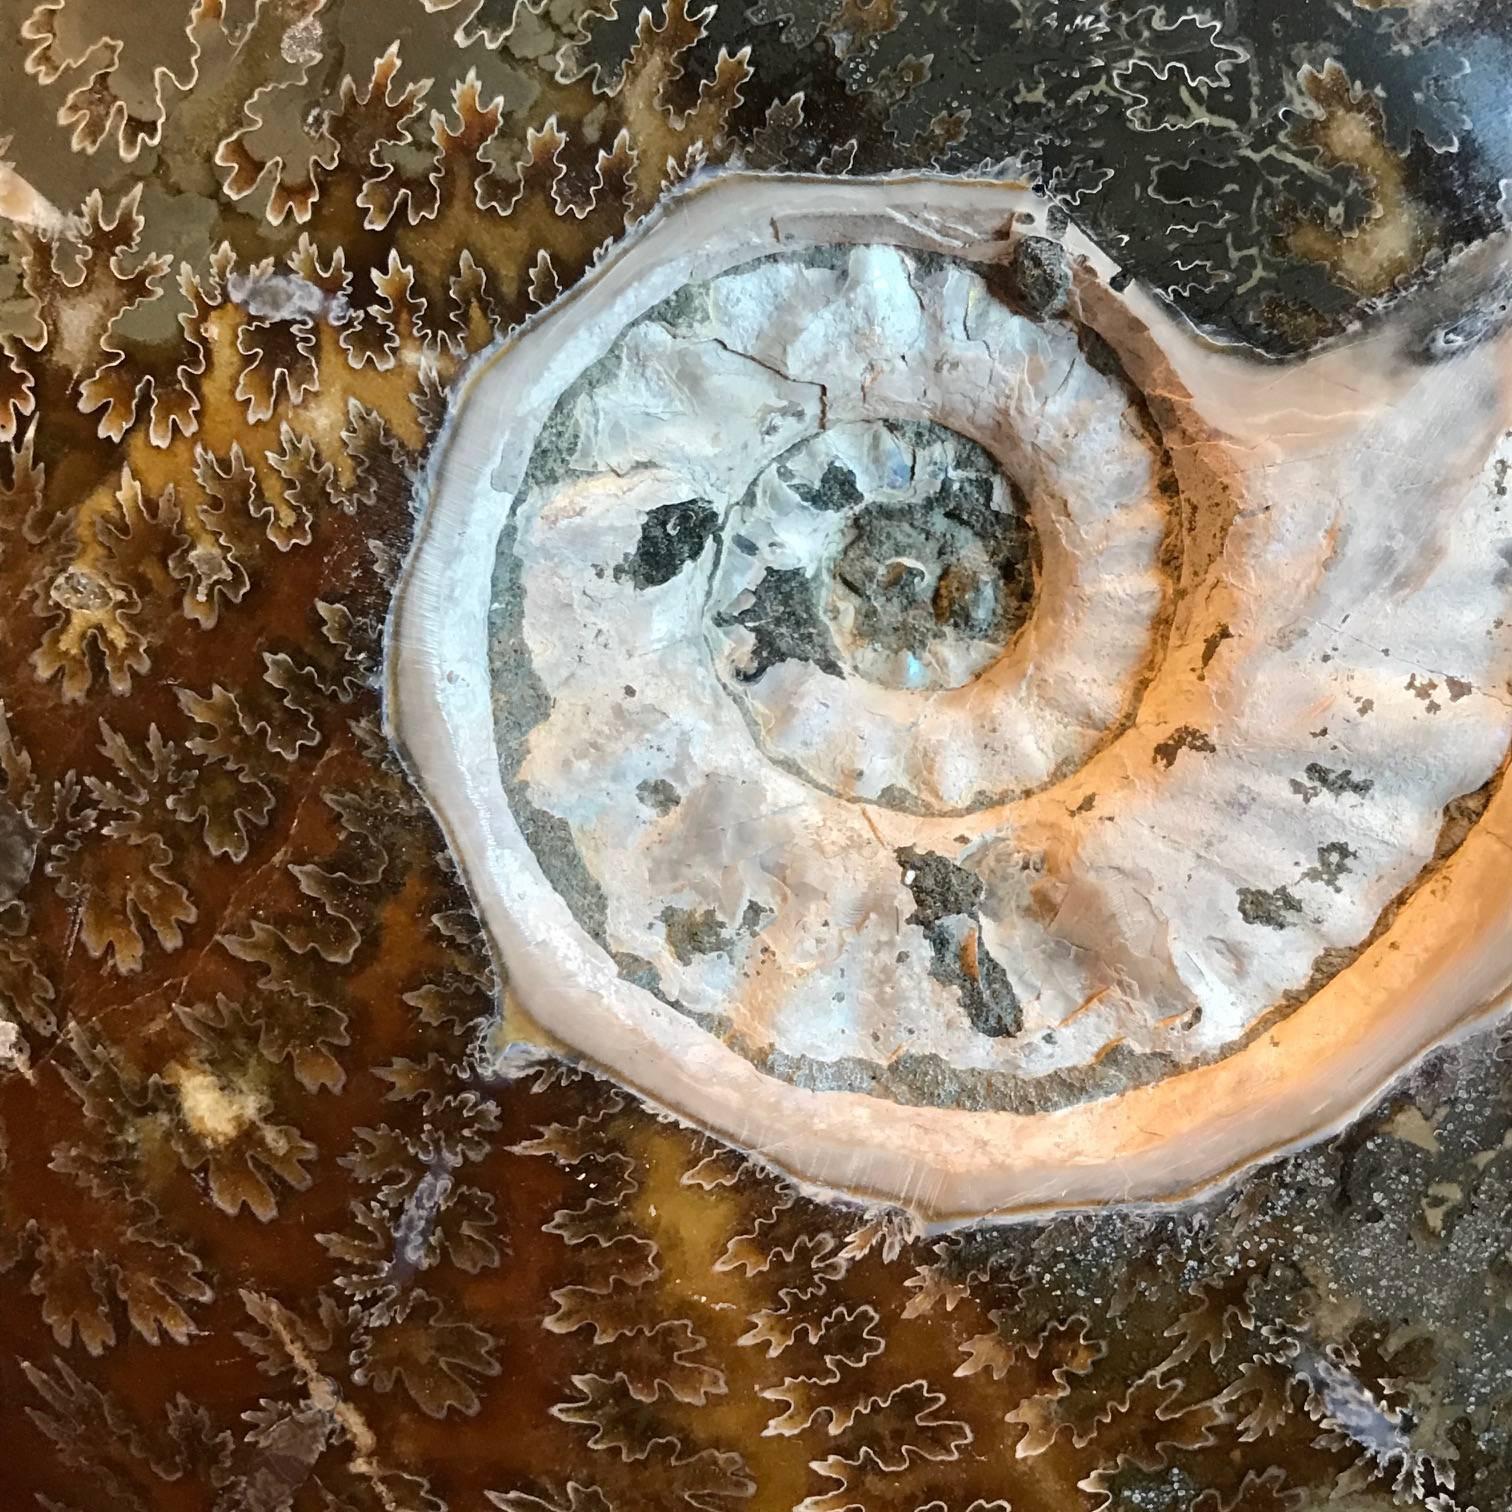 Prehistoric polished single whole ammonite newly mounted on custom steel stand.
Stand measures 7